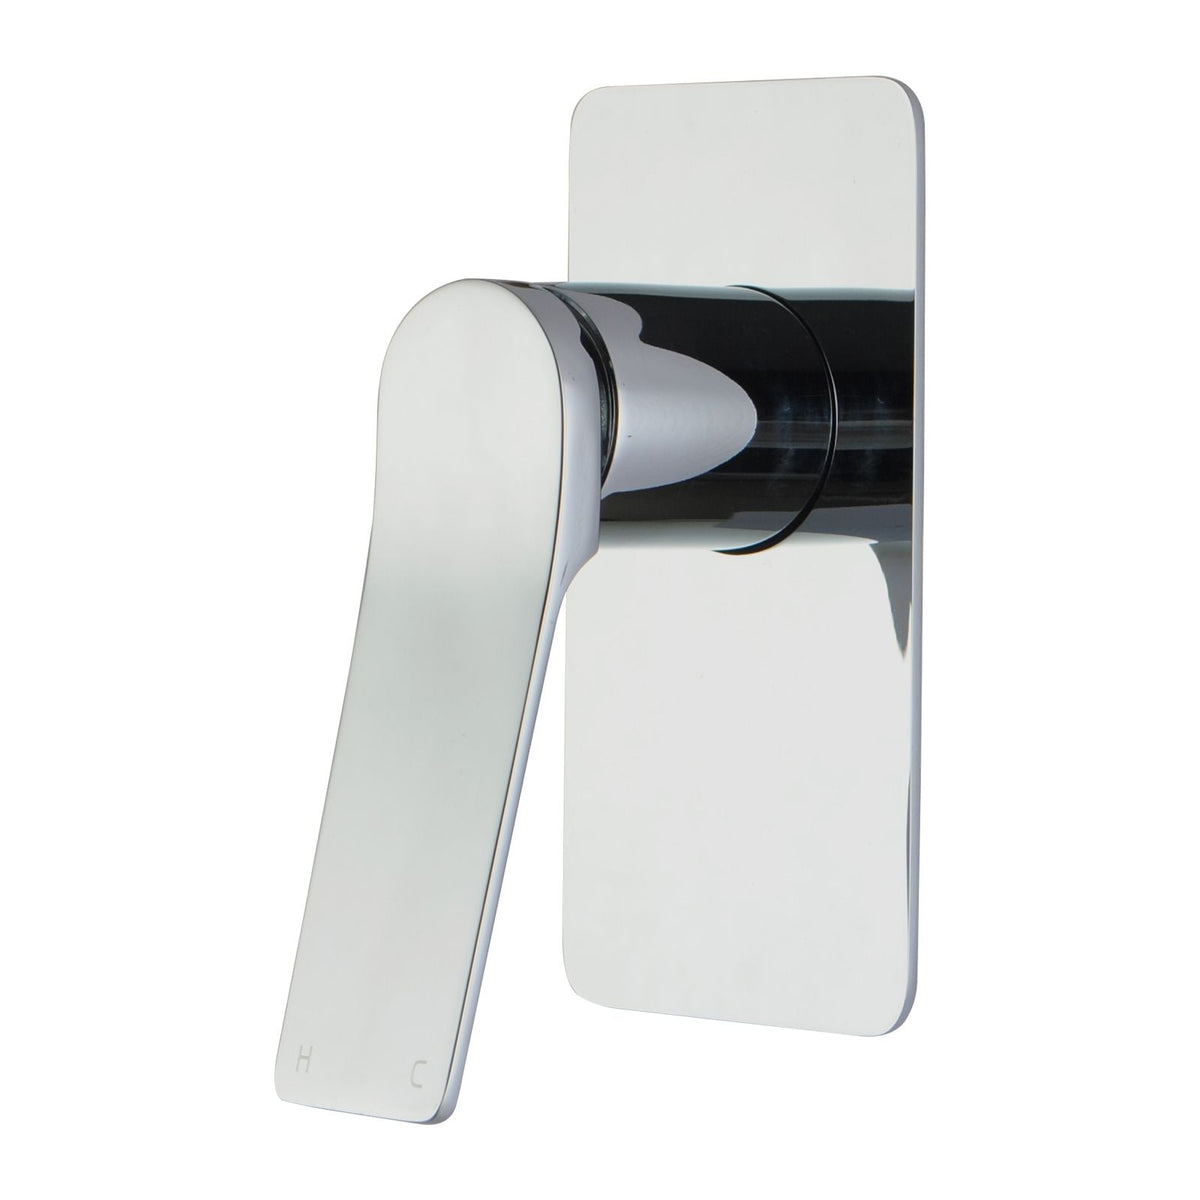 RUSHY Square Chrome Built-in Shower Mixer(Brass)